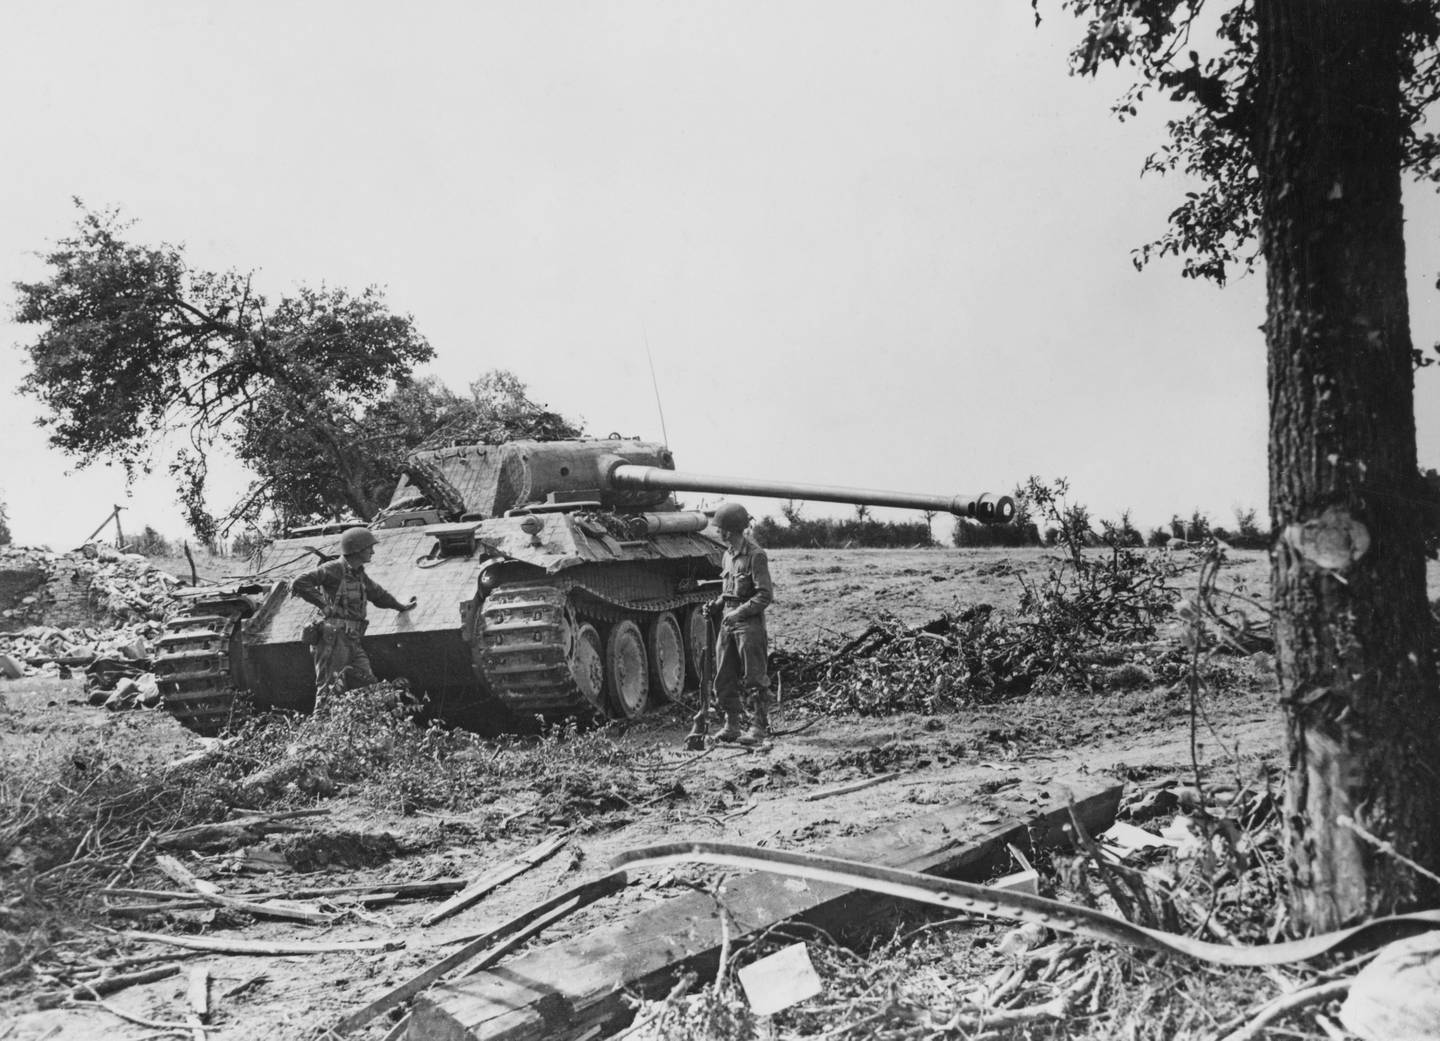 Captain Henry Baushausen and Lieutenant Gardner Colson of the 359th Infantry Regiment, 90th Infantry Division, United States Third Army examine a knocked Panzerkampfwagen V Aus G Panther tank from the 33rd Panzer Regiment, 9th Panzer Division during the Normandy Campaign on 28th August 1944 near the Le Bourg Saint-Leonard region of France. Captain Henry Baushausen would be killed in action on 11th November 1944. US Official Photo EA 34517 (KY) (Photo by Keystone/Hulton Archive/Getty Images).